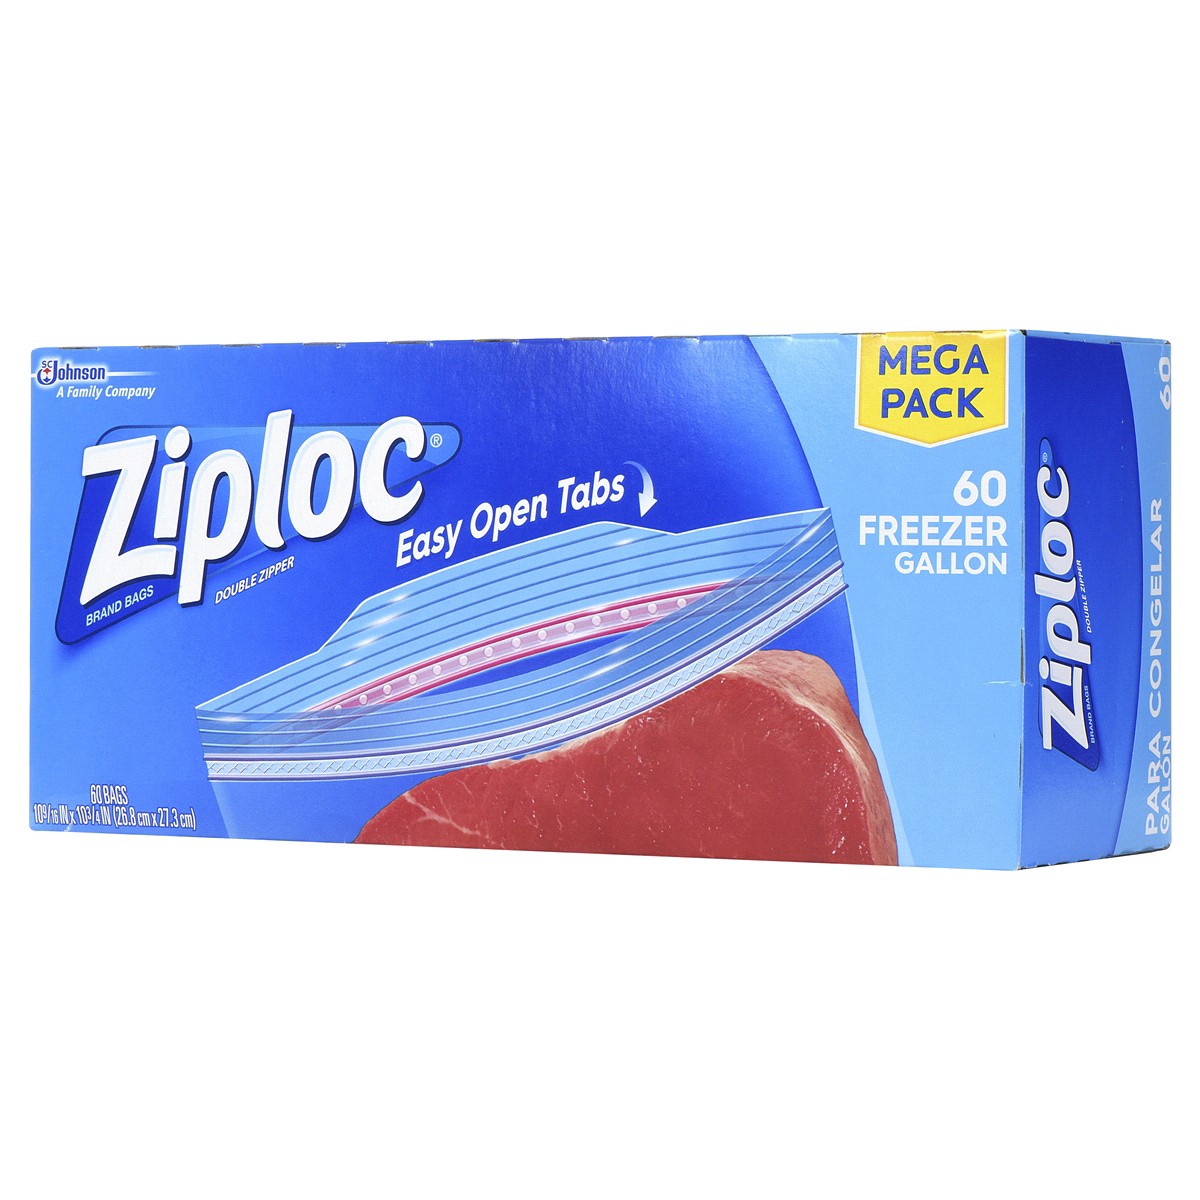 slide 10 of 10, Ziploc Brand Freezer Bags with New Stay Open Design, Gallon, 60, Patented Stand-up Bottom, Easy to Fill Freezer Bag, Unloc a Free Set of Hands in the Kitchen, Microwave Safe, BPA Free, 60 ct